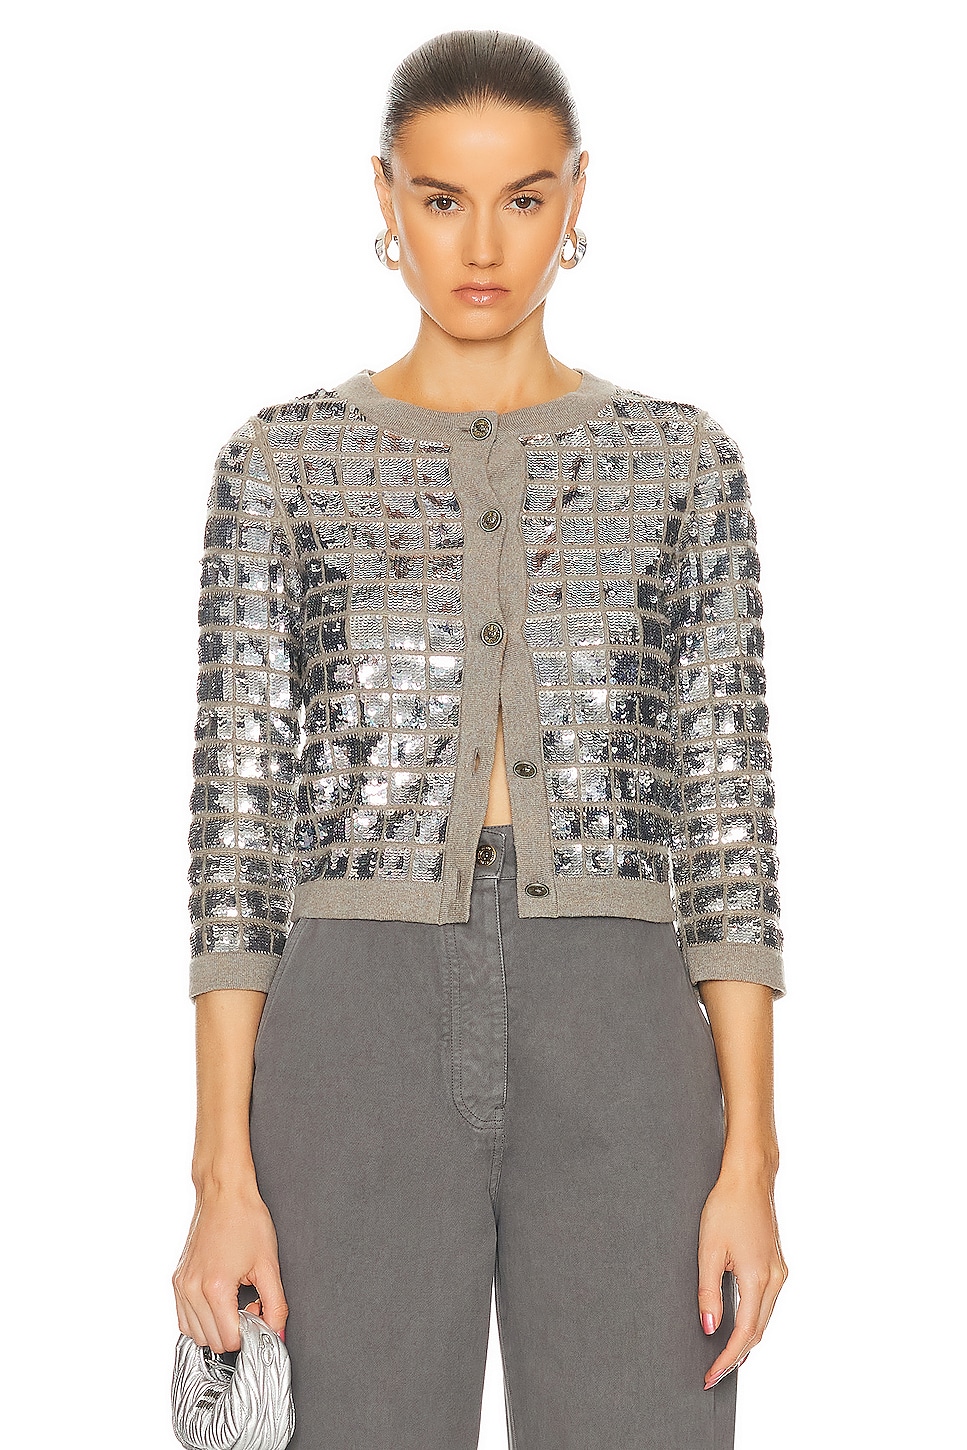 Image 1 of FWRD Renew Chanel Cashmere Sequin Cardigan in Silver